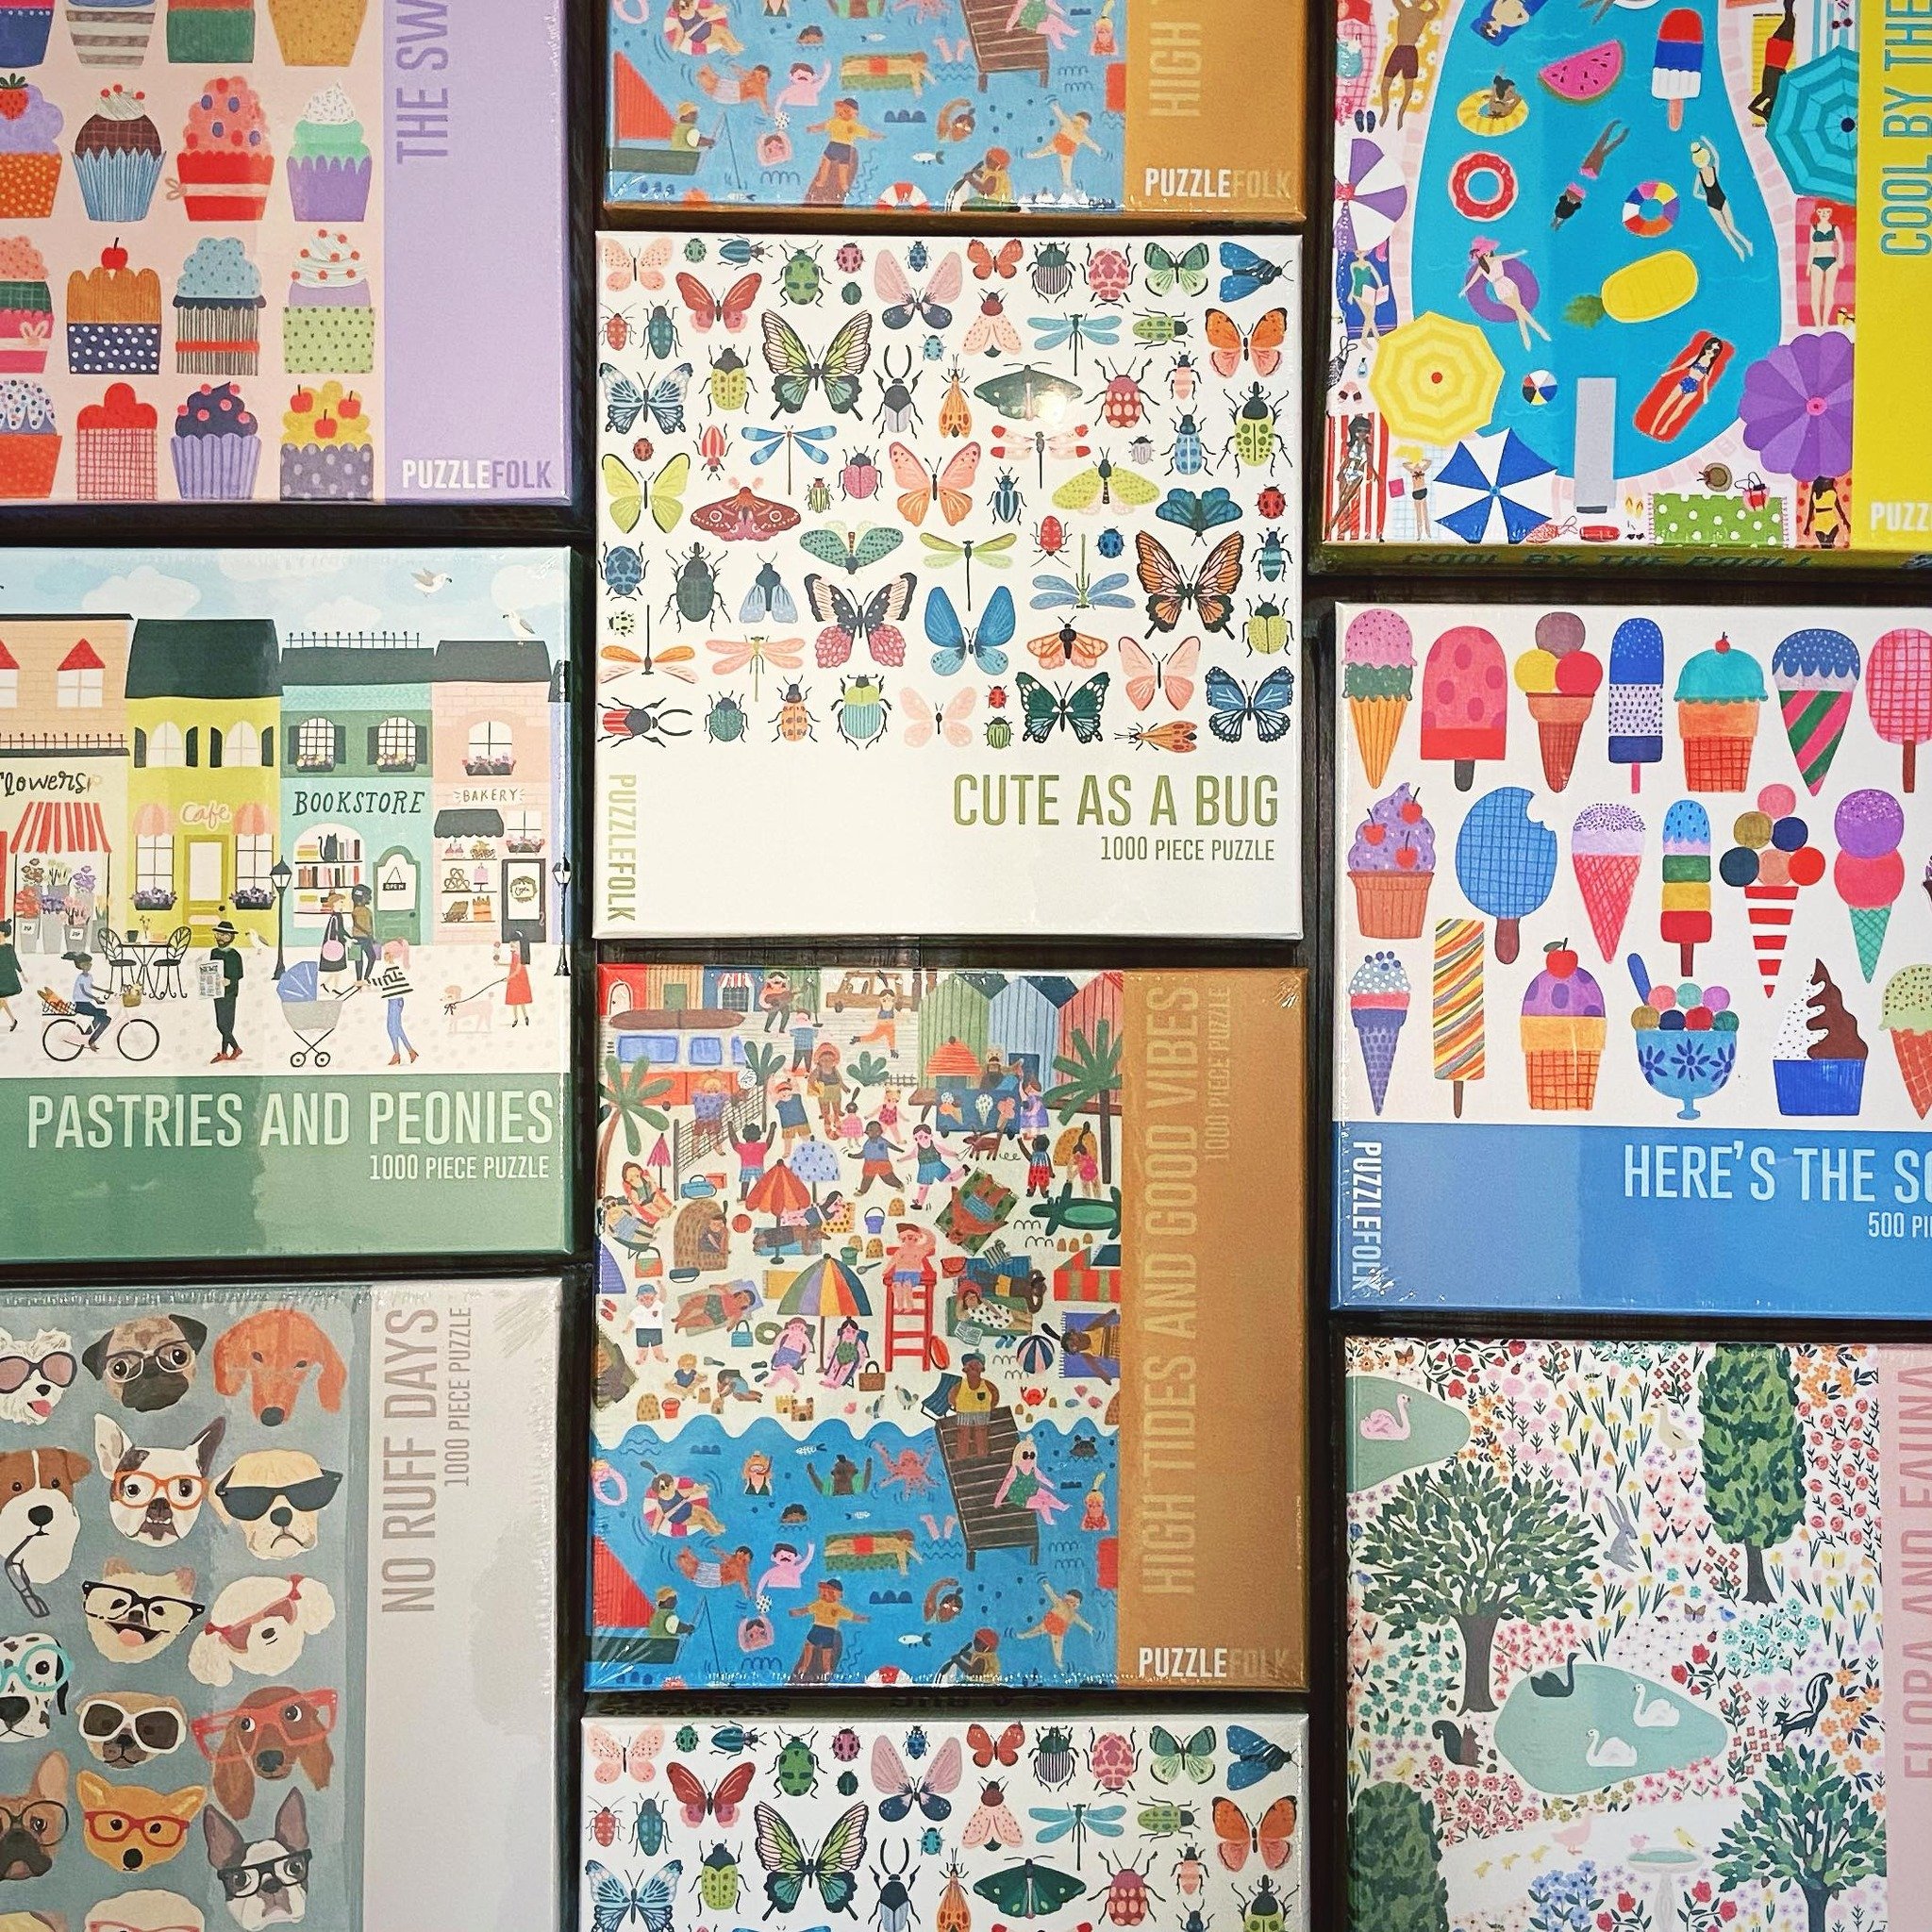 Calling all puzzle lovers! We just discovered a new vendor and are in love with their gorgeous designs! Grab one for your next family vacation or a fun rainy day activity!